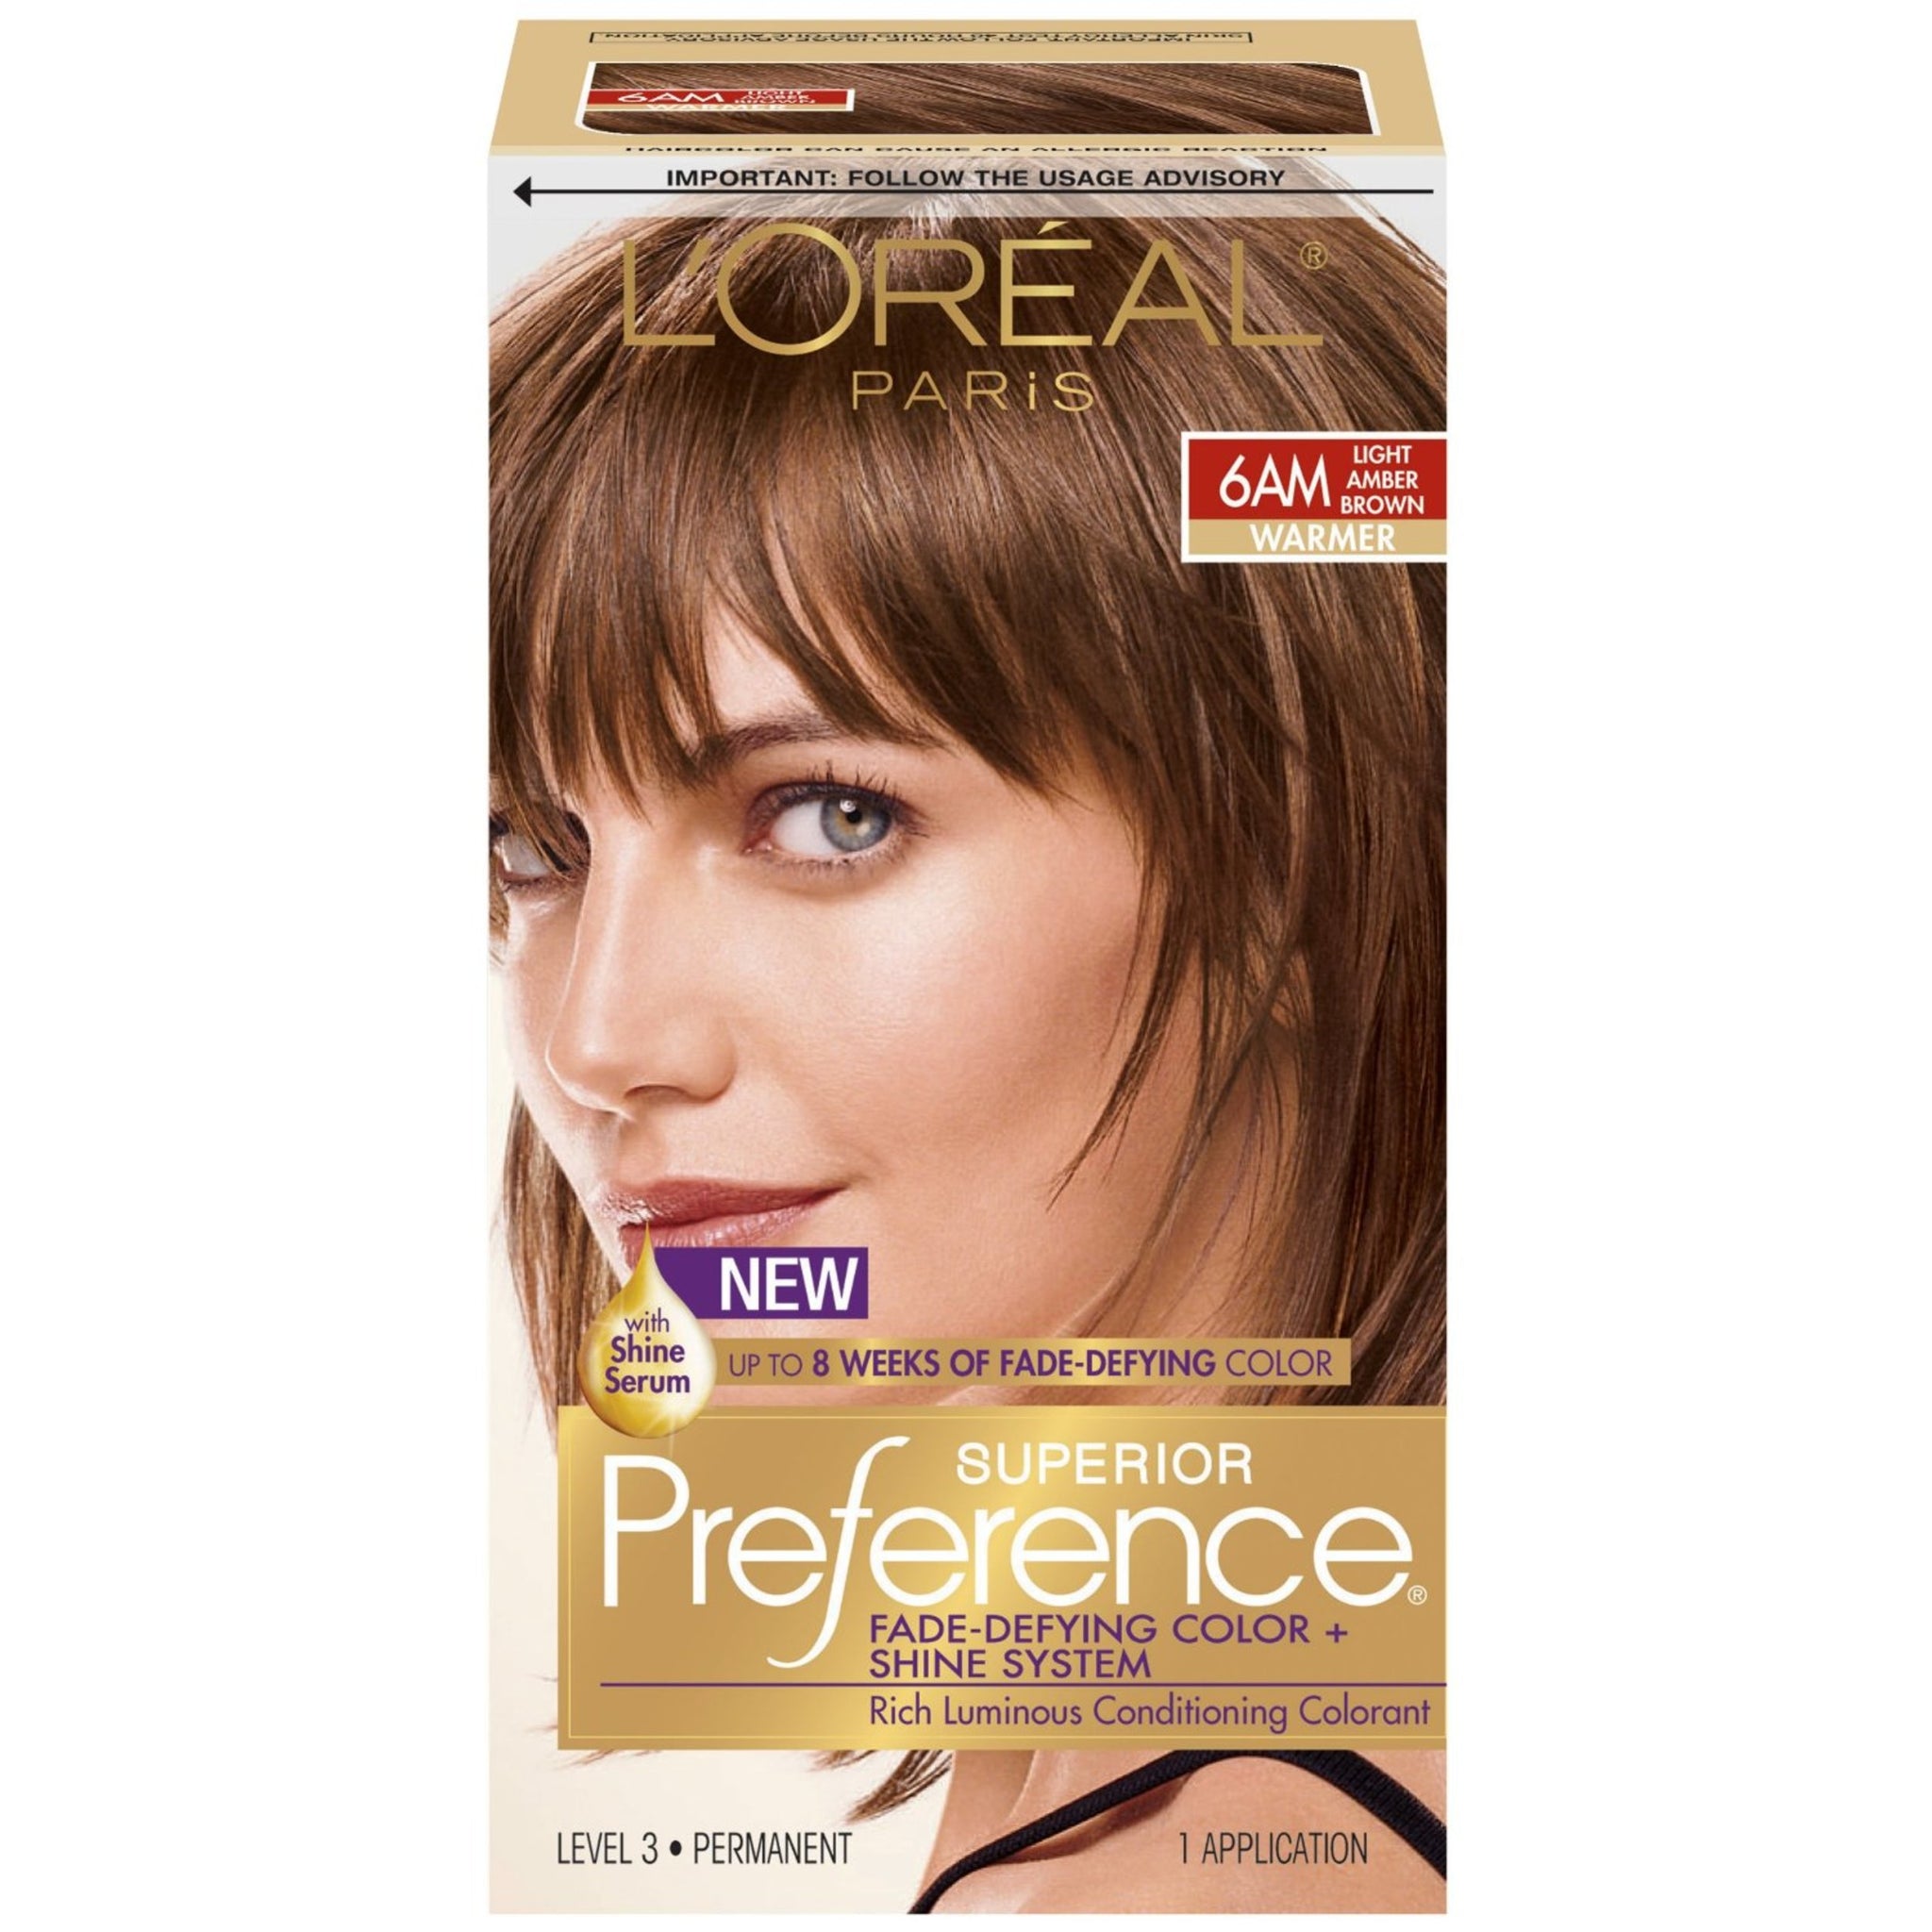 Superior Preference Fade-Defying Shine Permanent Hair Color